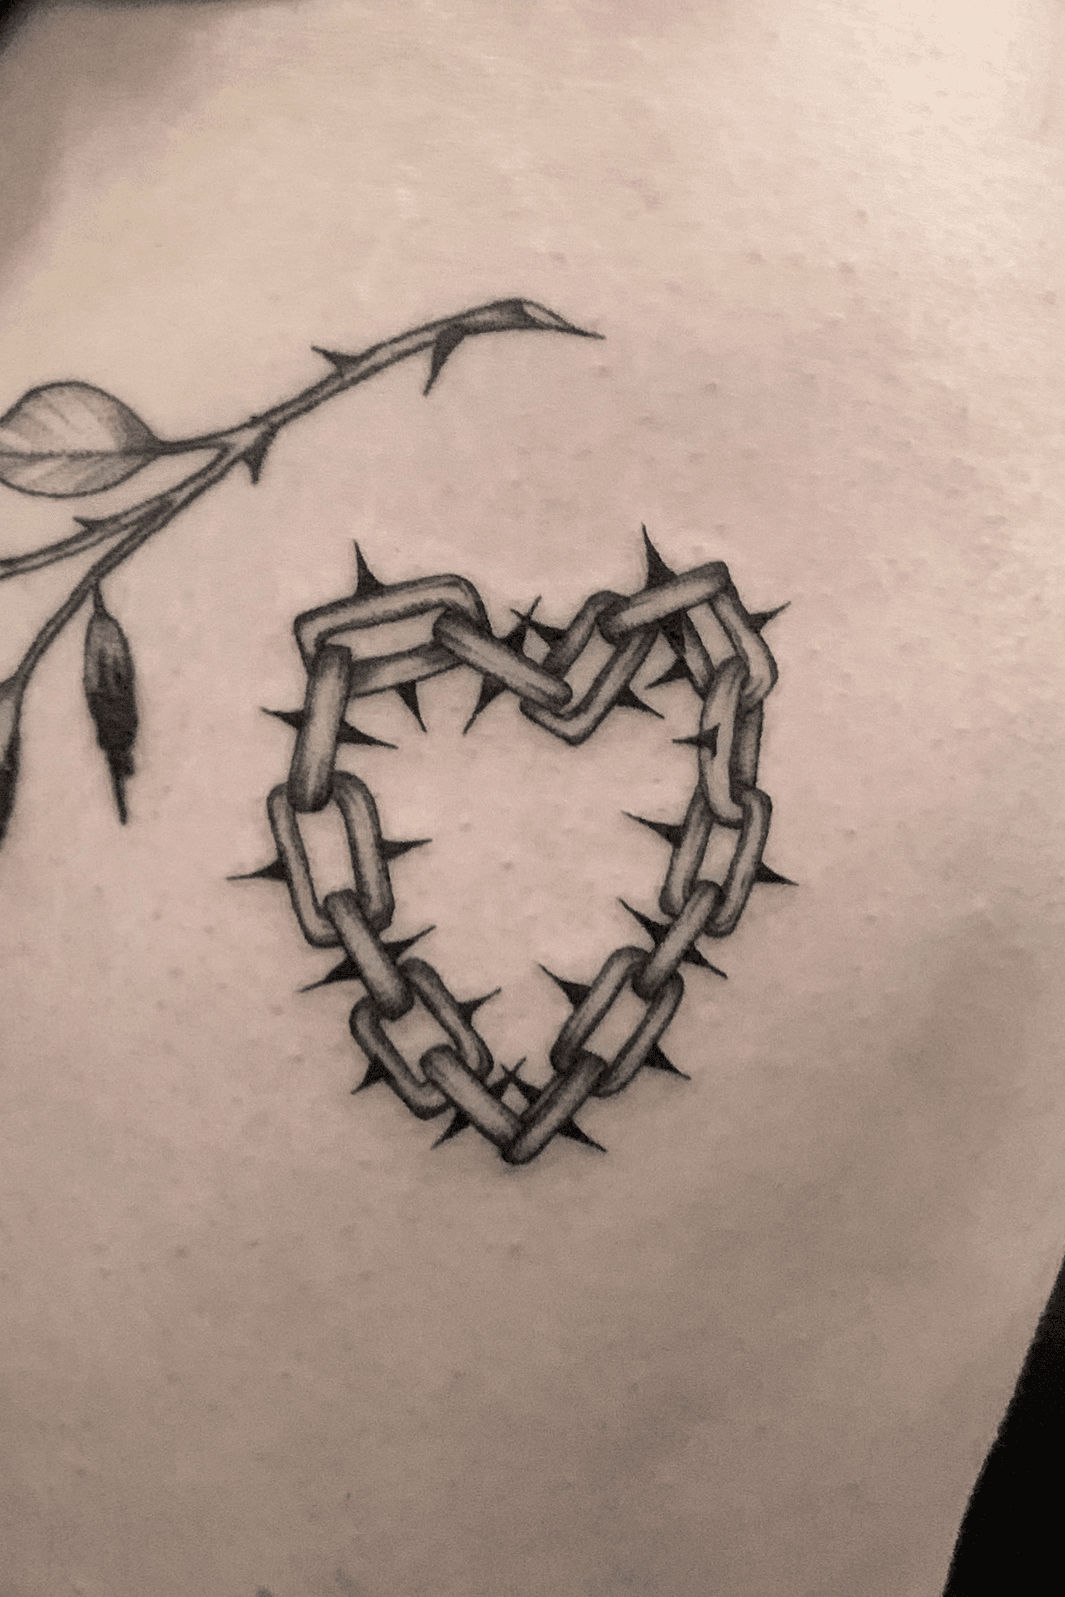 Chained Heart Tattoo Colour by averagesensation on DeviantArt